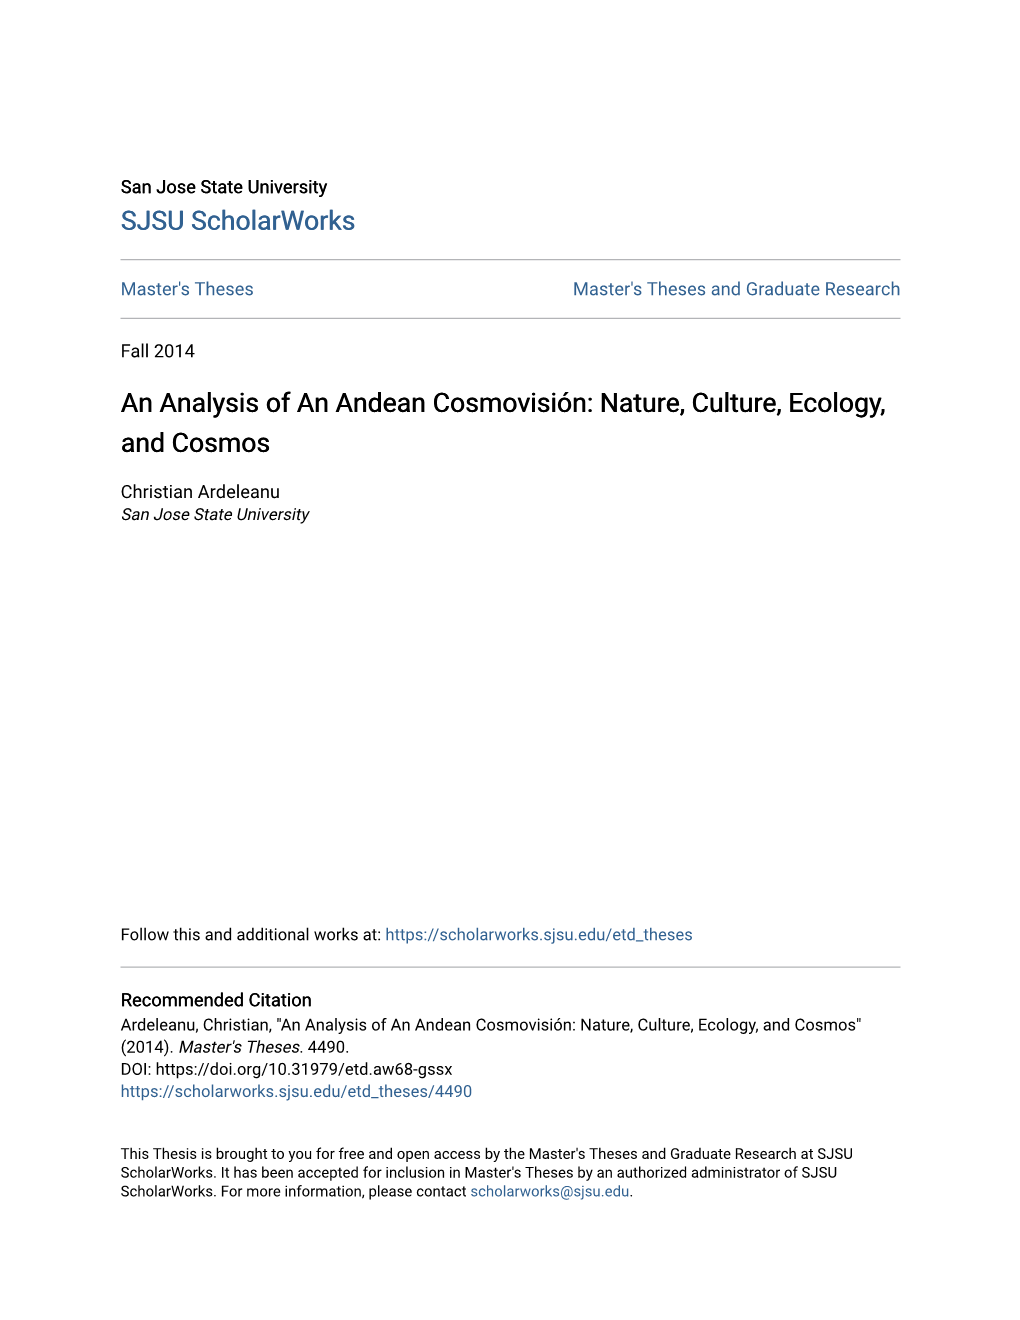 An Analysis of an Andean Cosmovisión: Nature, Culture, Ecology, and Cosmos